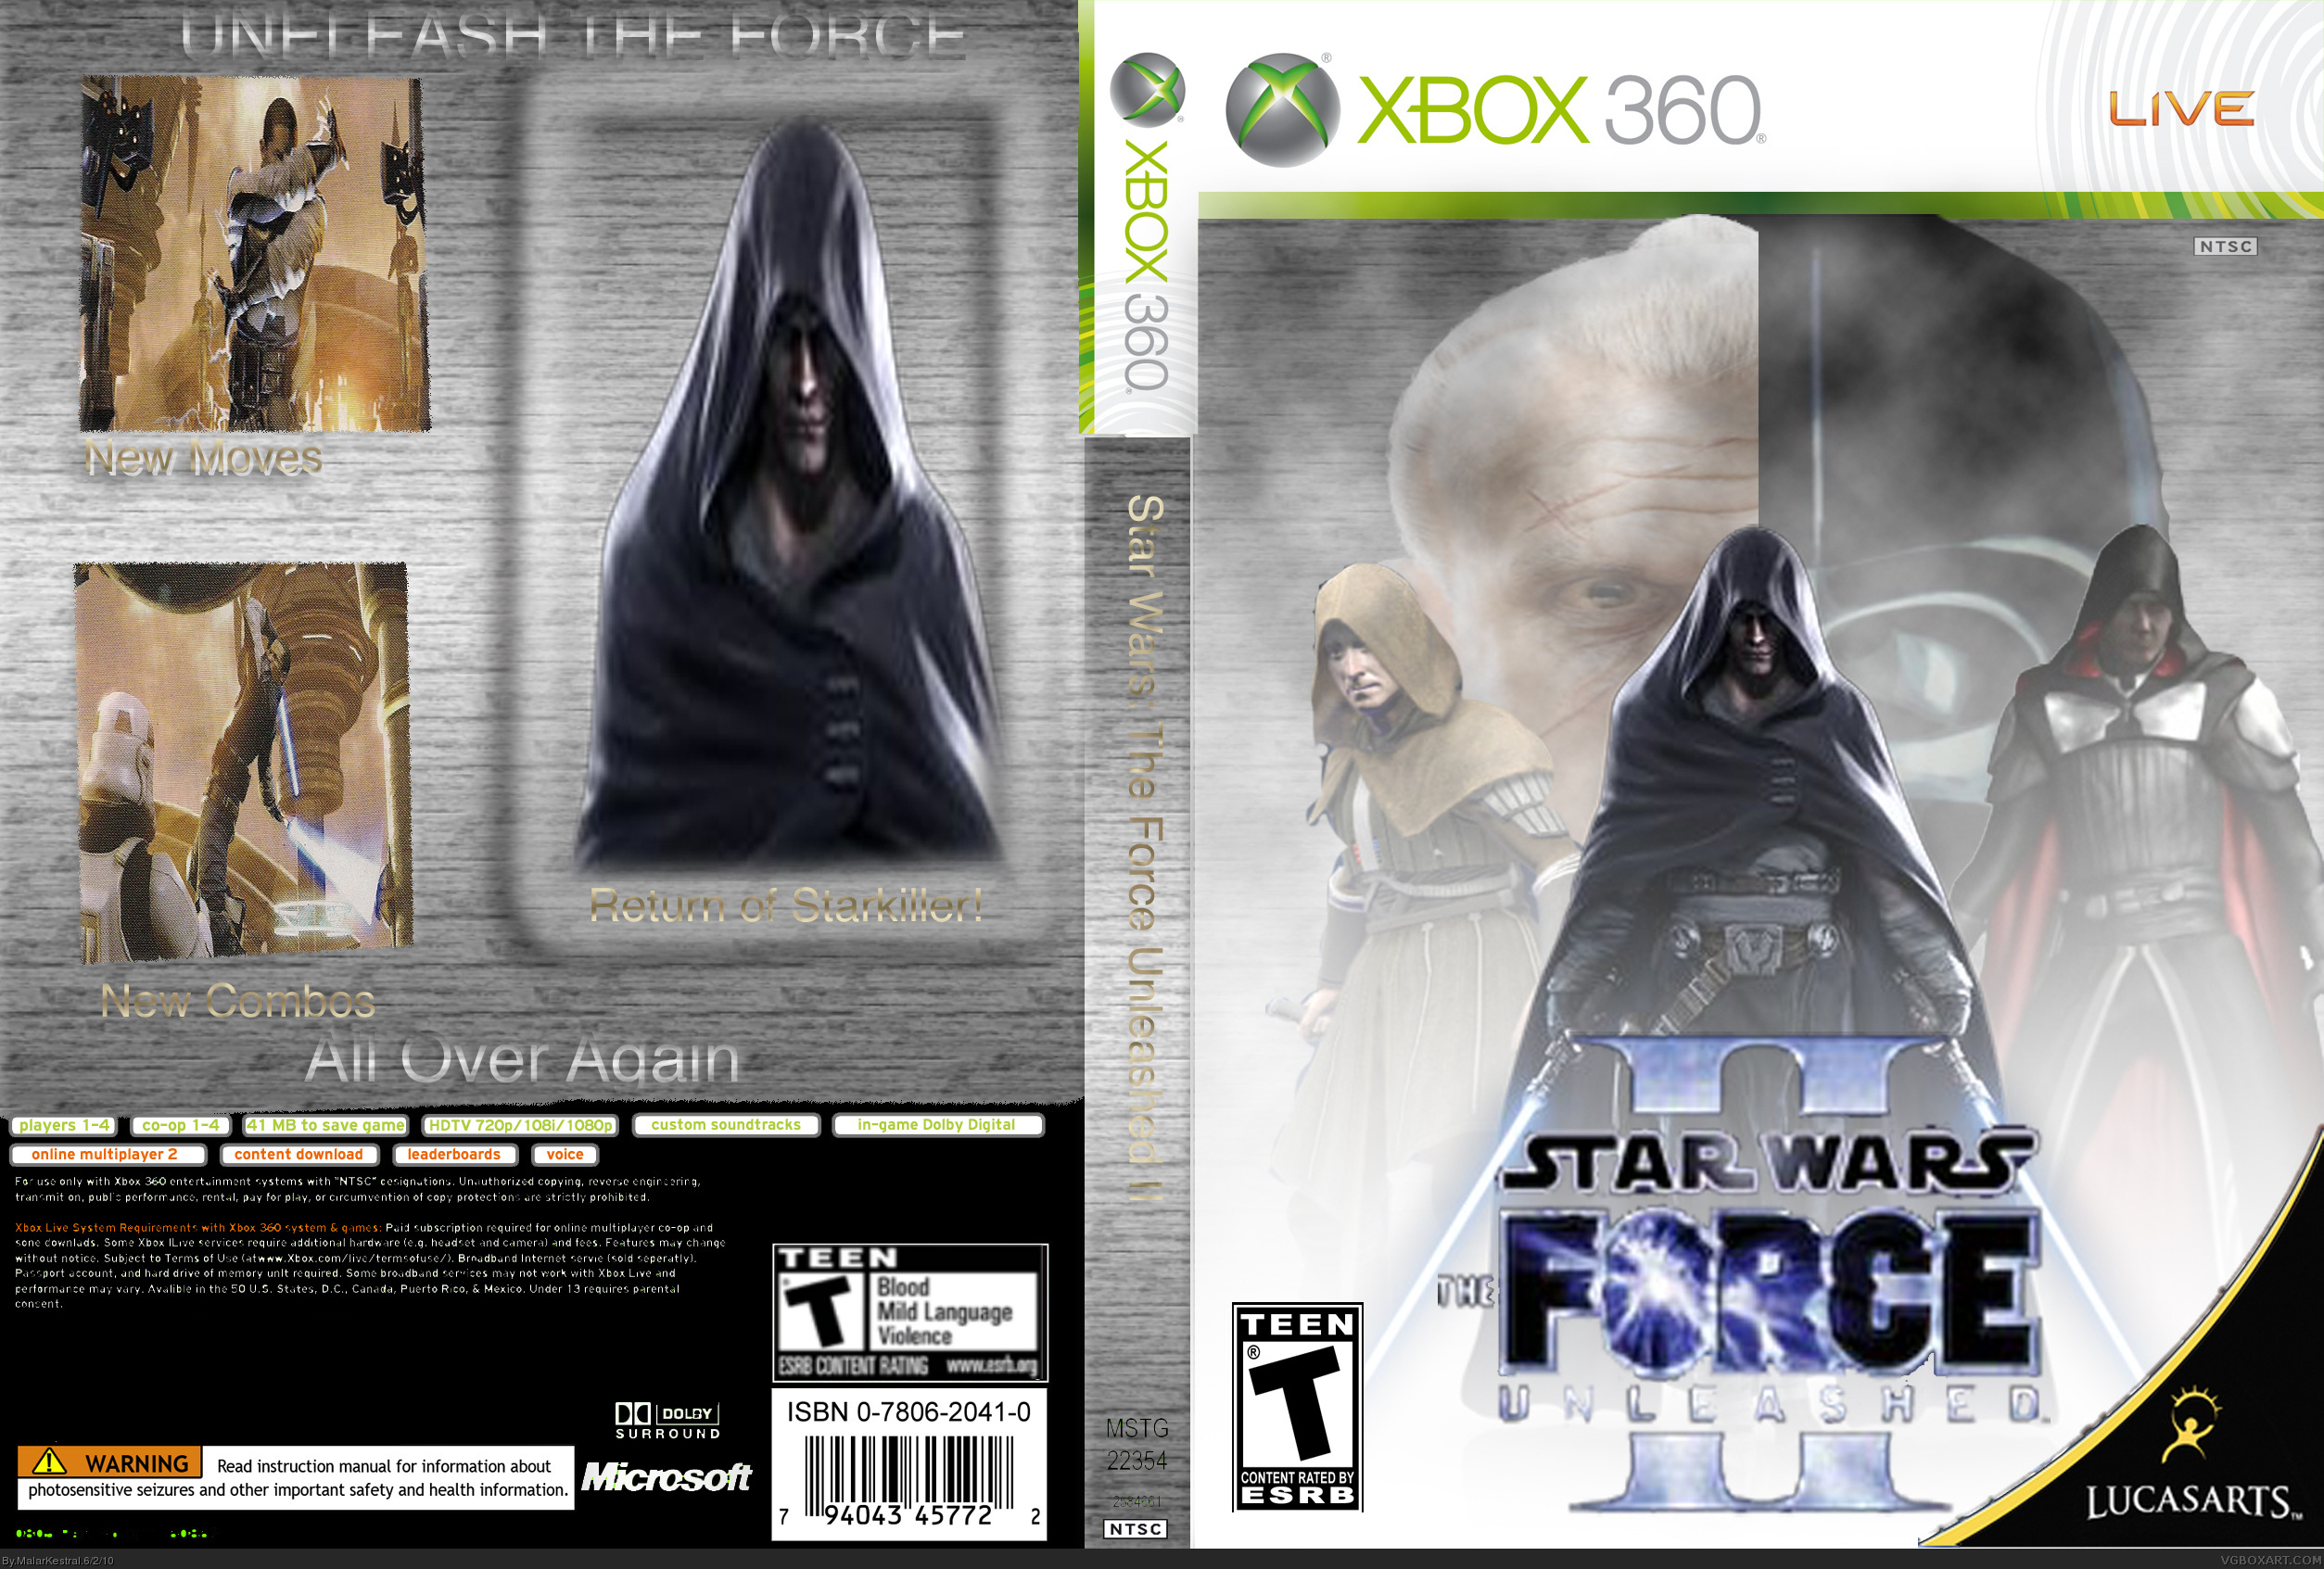 Star Wars the Force unleashed 2 Xbox 360 обложка. Star Wars the Force unleashed Xbox 360 обложка. Коды на Star Wars the Force unleashed 1. MX unleashed Xbox 360 обложка. Коды star wars the force unleashed 2